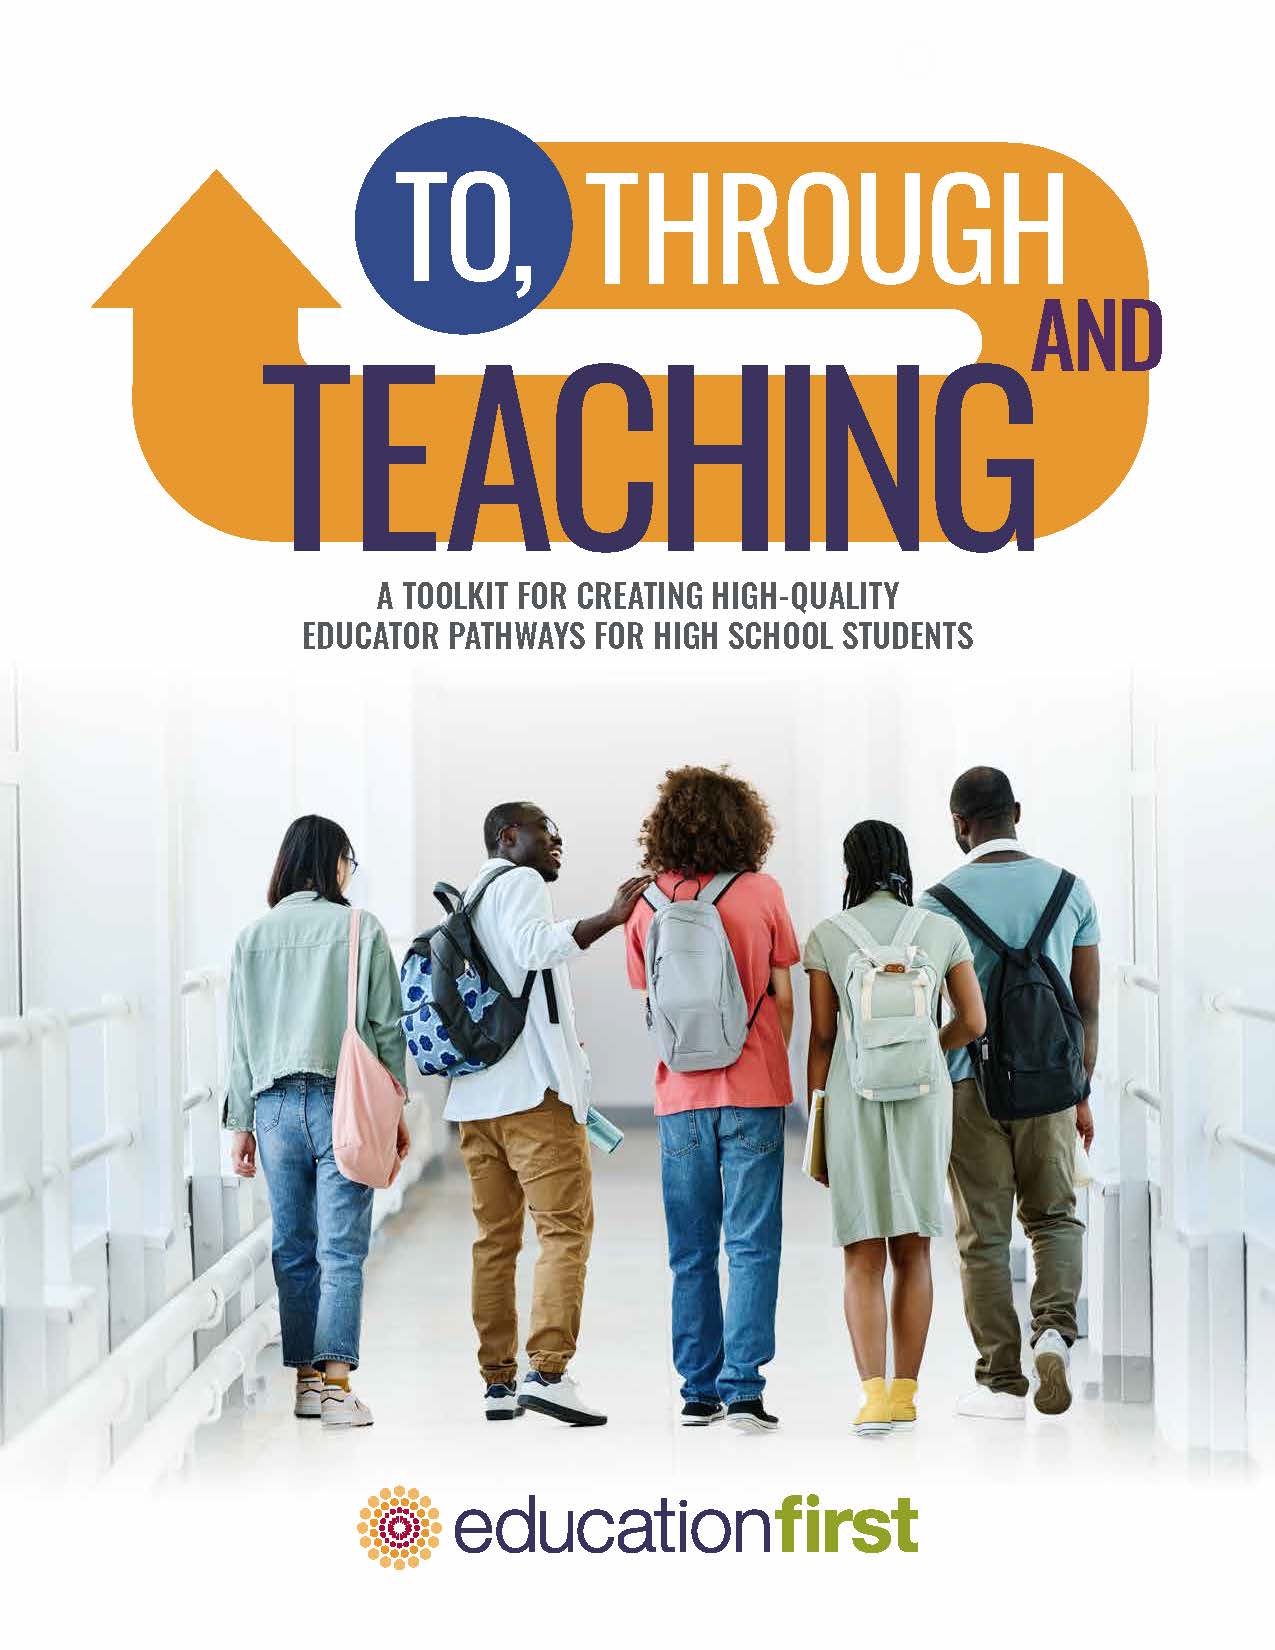 Publication cover with 5 students walking down a school hallway